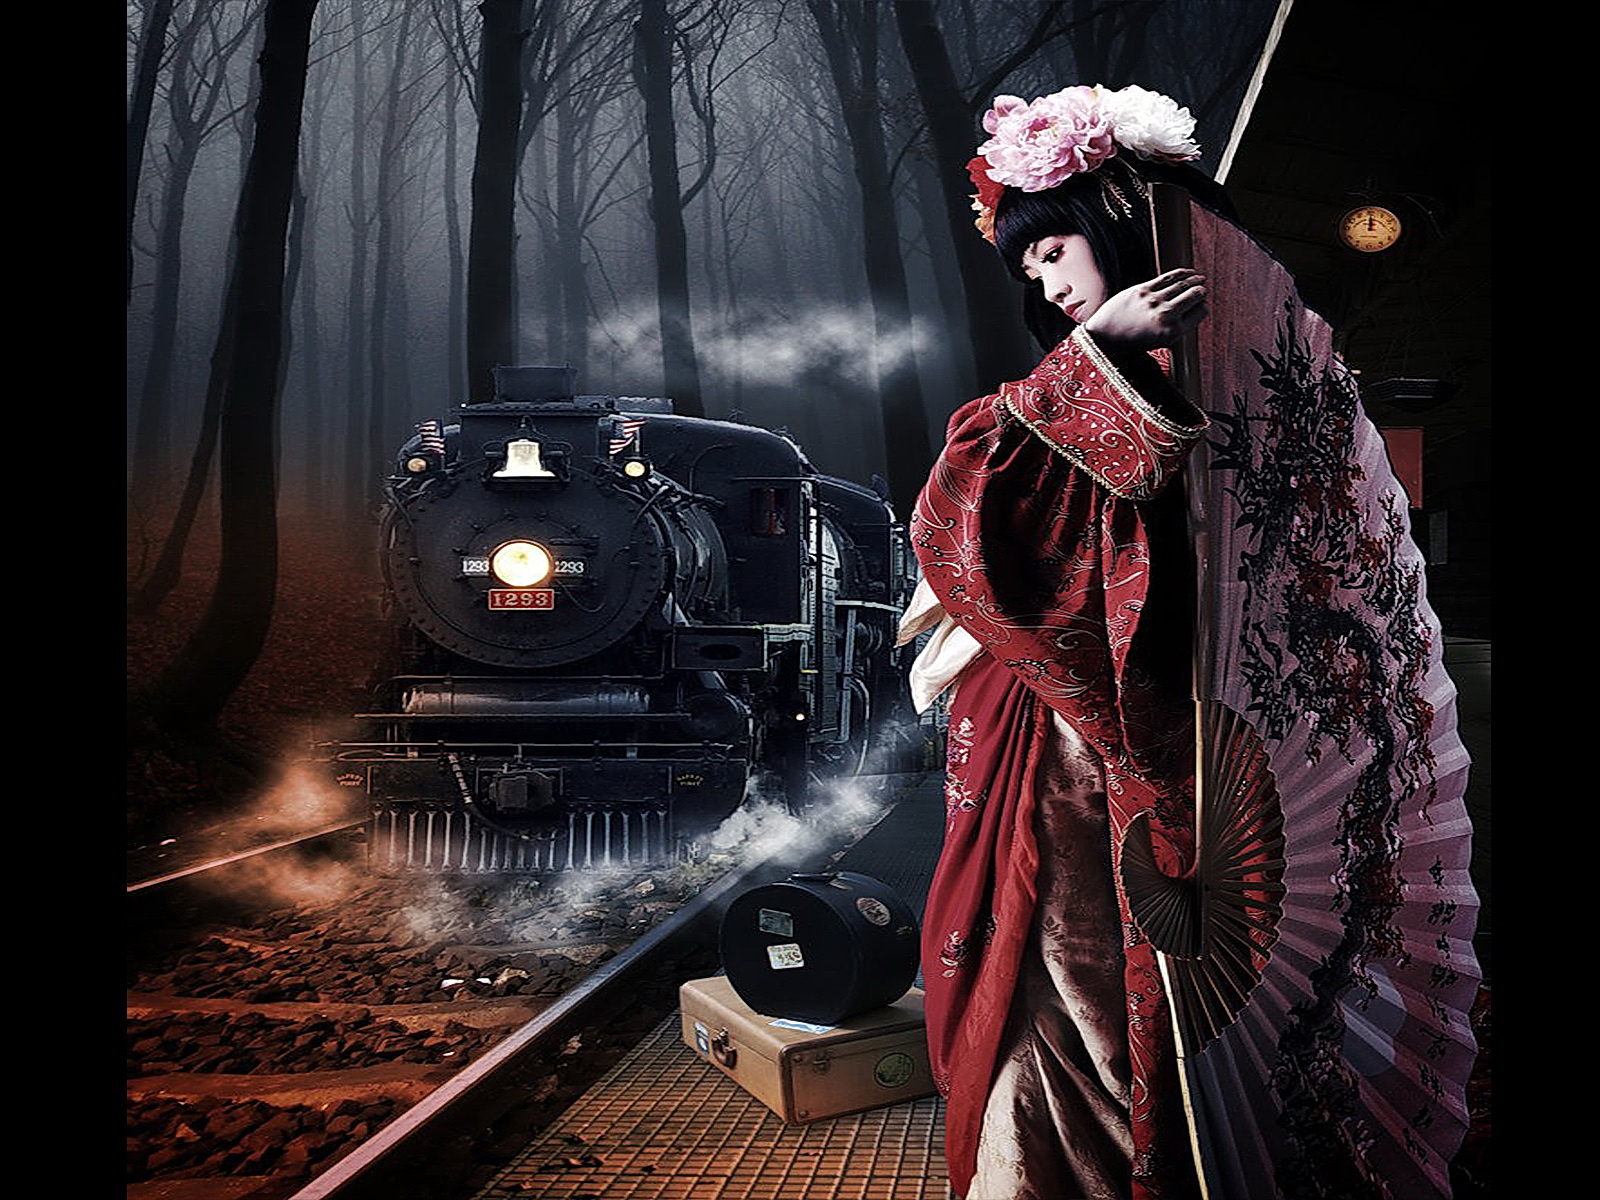 Asian woman on a train near a clock and tree at night, with a red and dark ambiance.